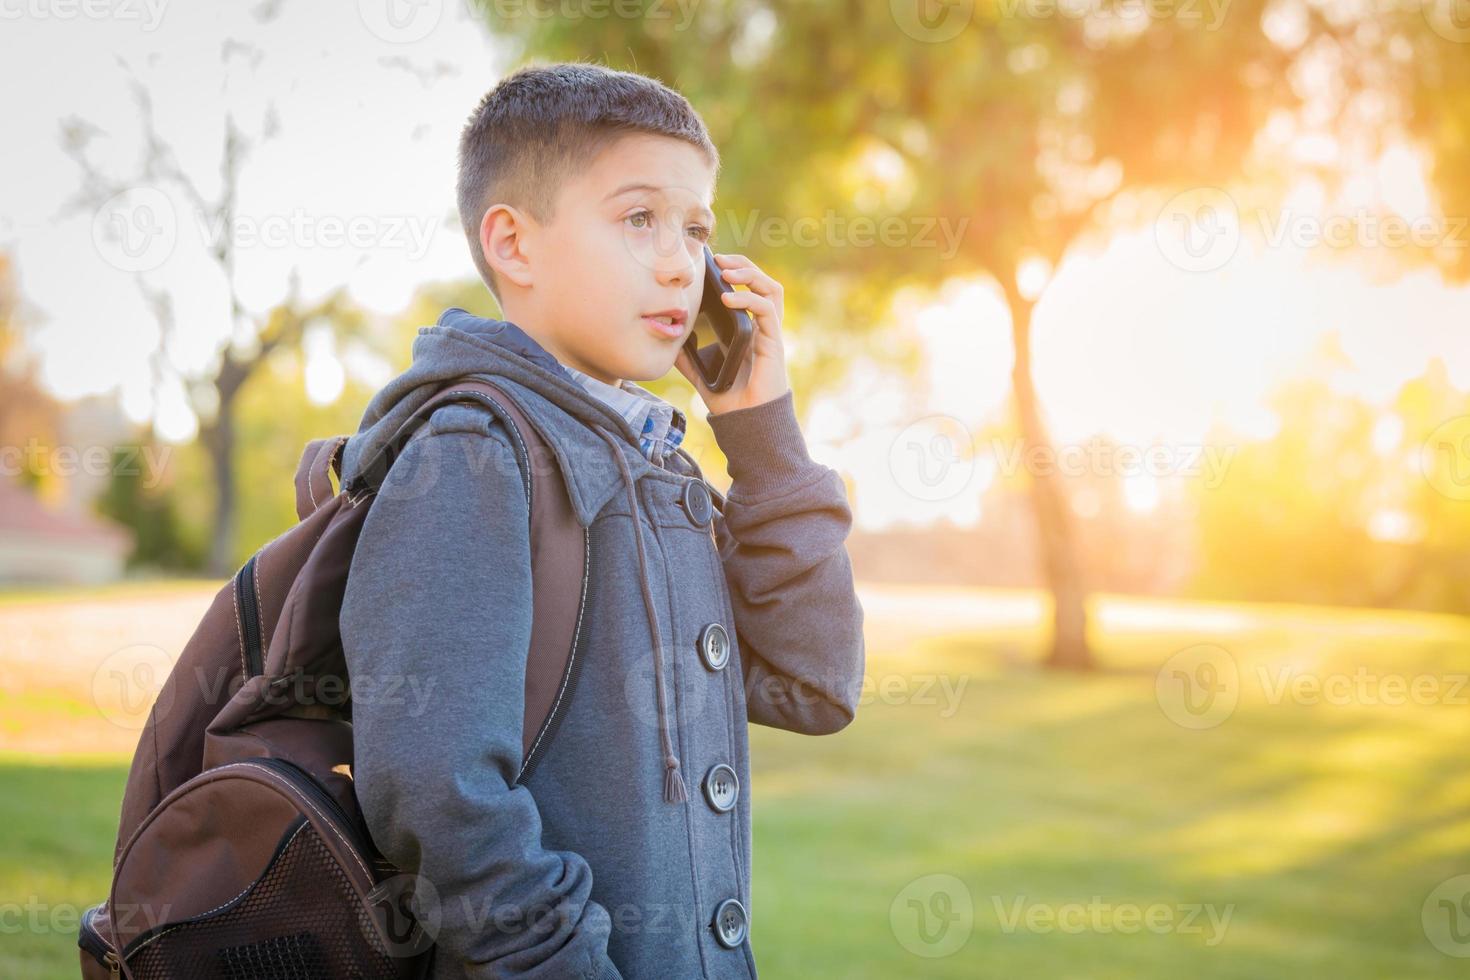 Young Hispanic Boy Walking Outdoors With Backpack Talking on Cell Phone photo